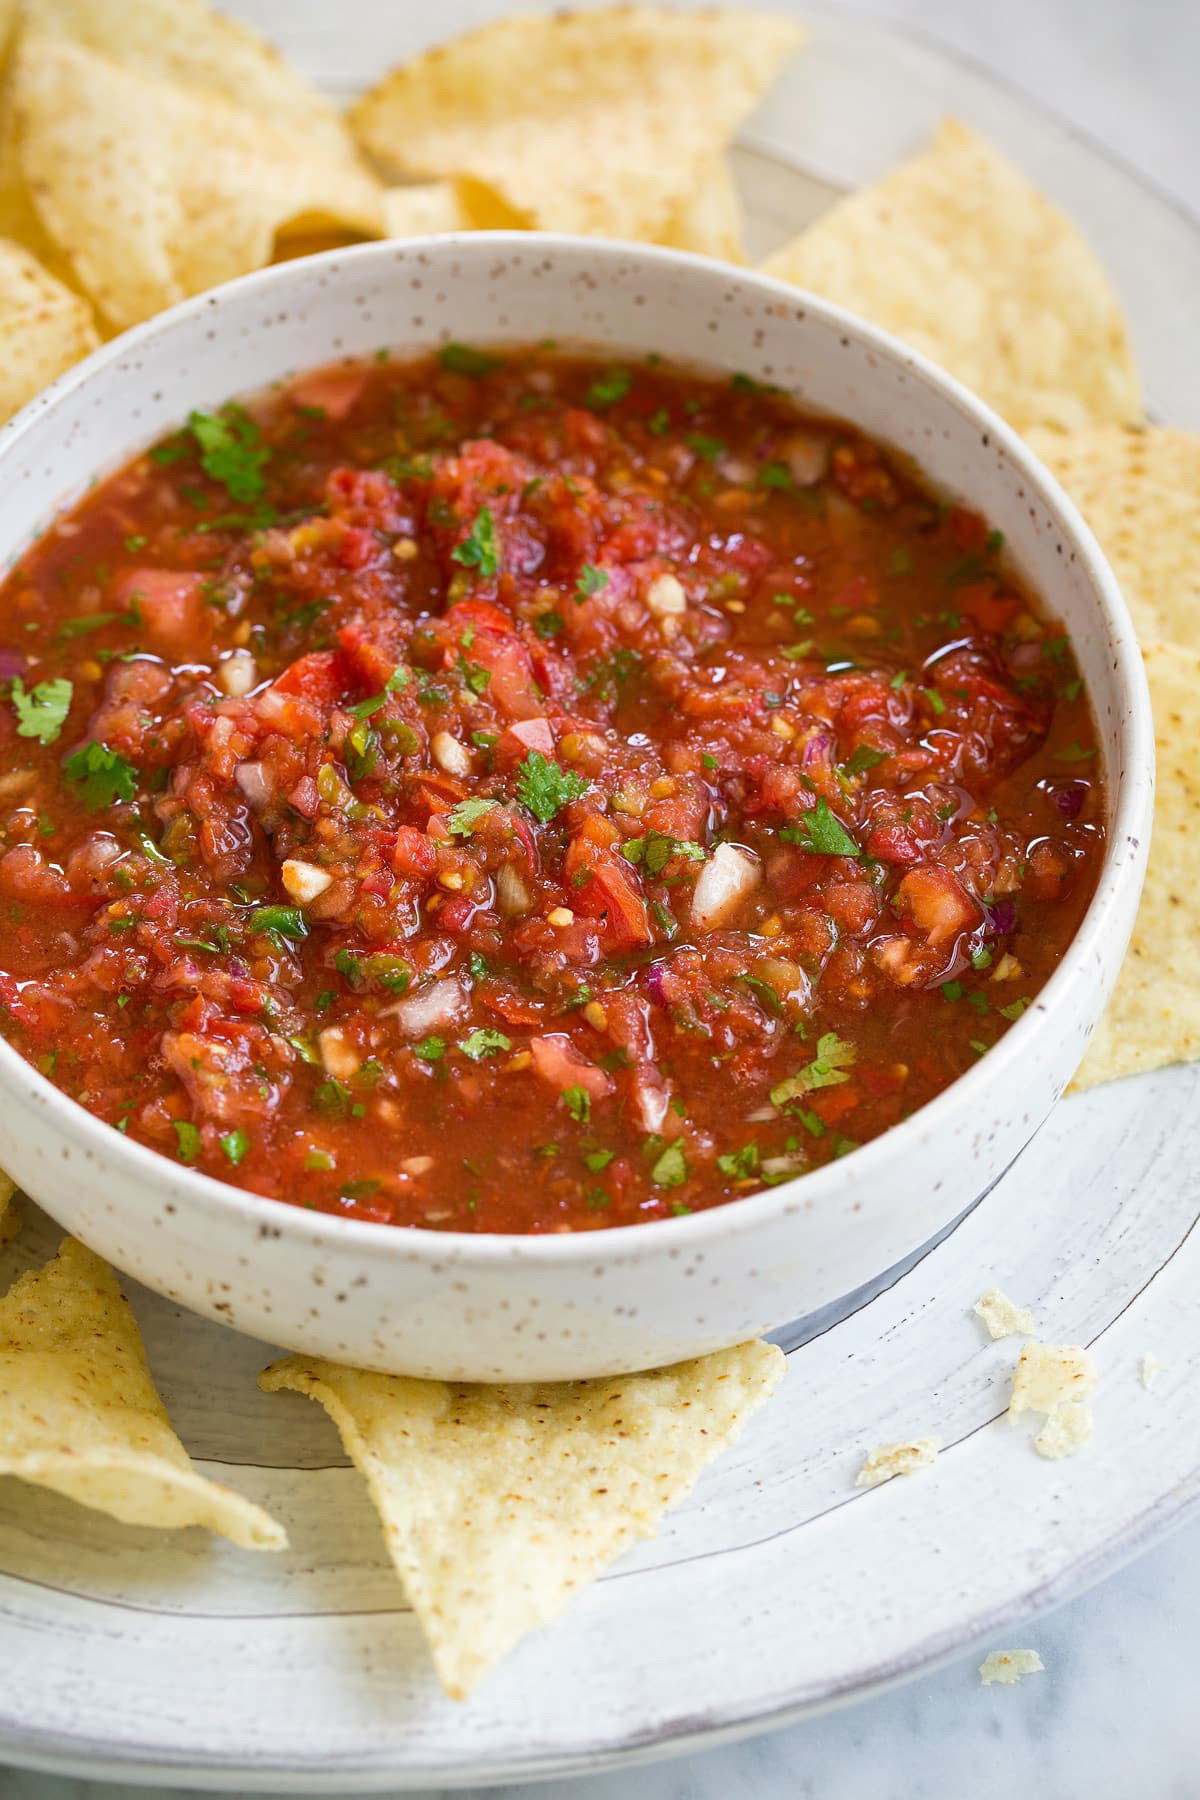 Home Canned Salsa Recipe
 Easy Homemade Salsa Recipe Cooking Classy